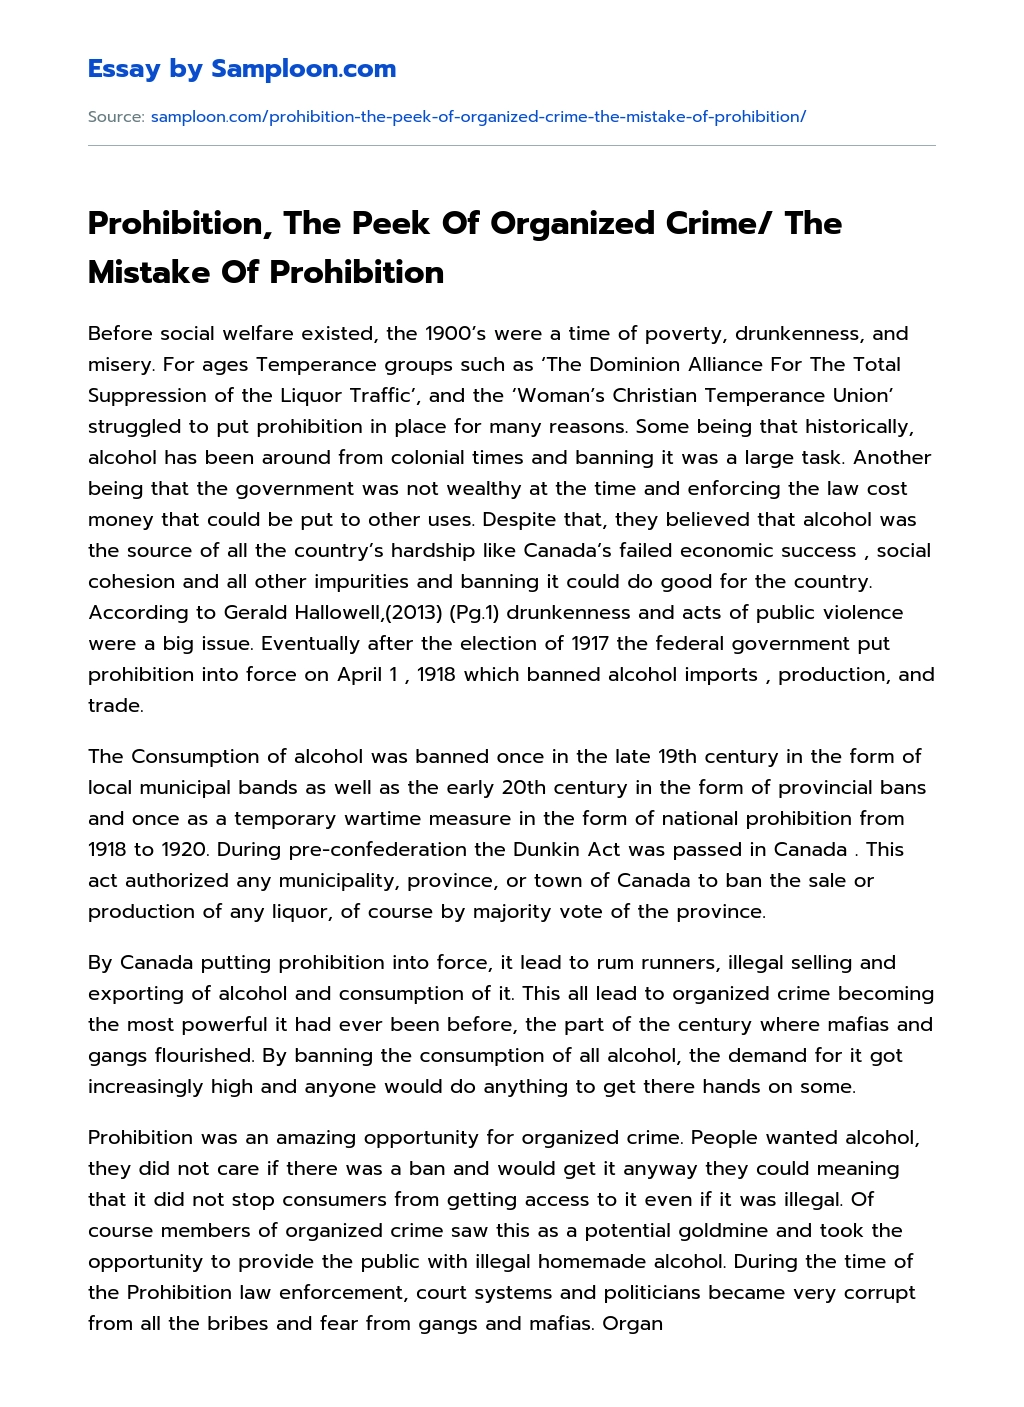 Prohibition, The Peek Of Organized Crime. The Mistake Of Prohibition essay